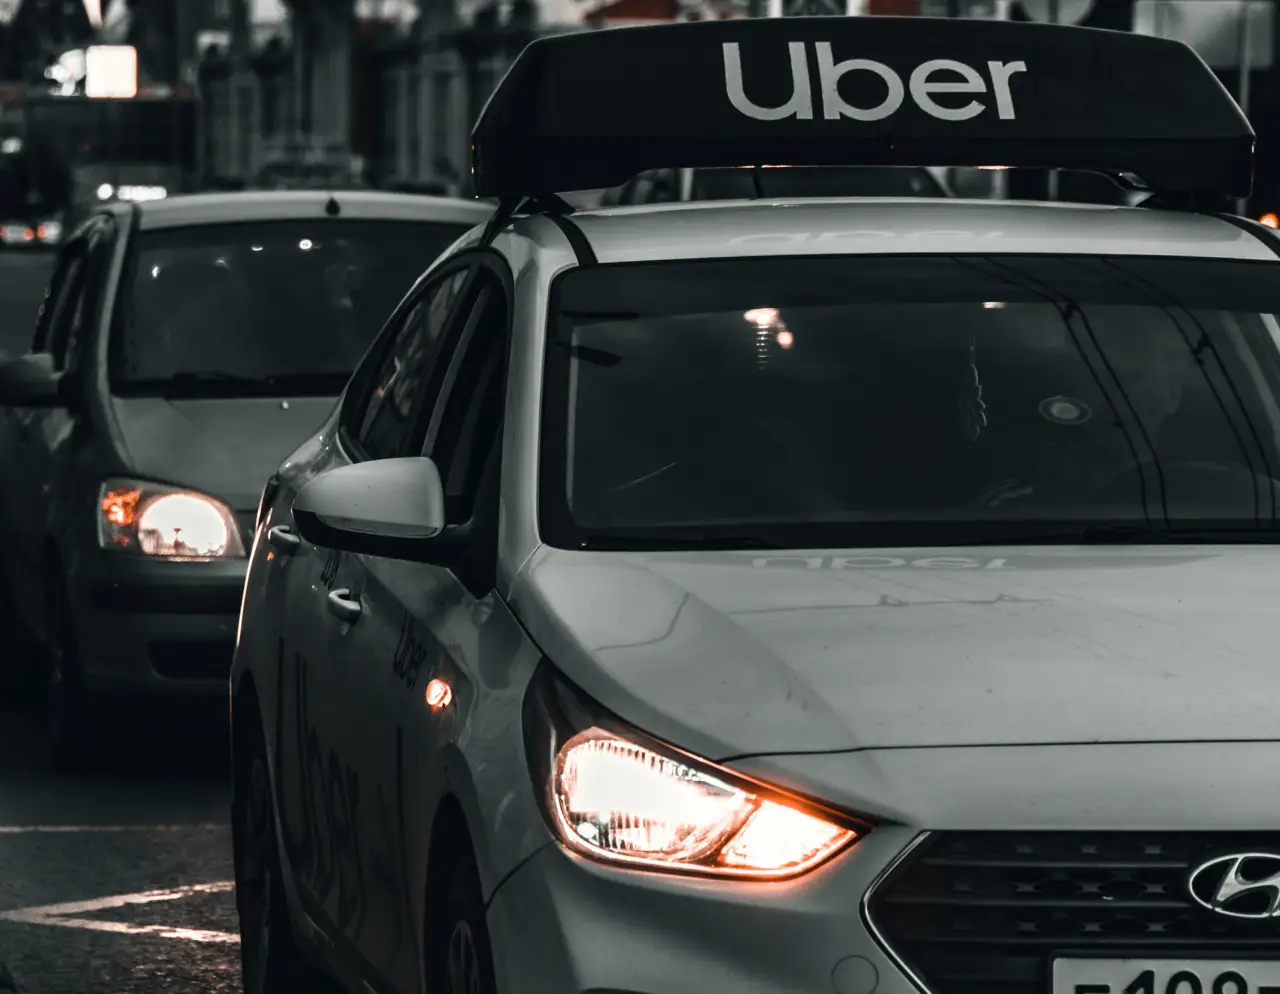 Uber offers payments to US car owners to try other modes of transportation